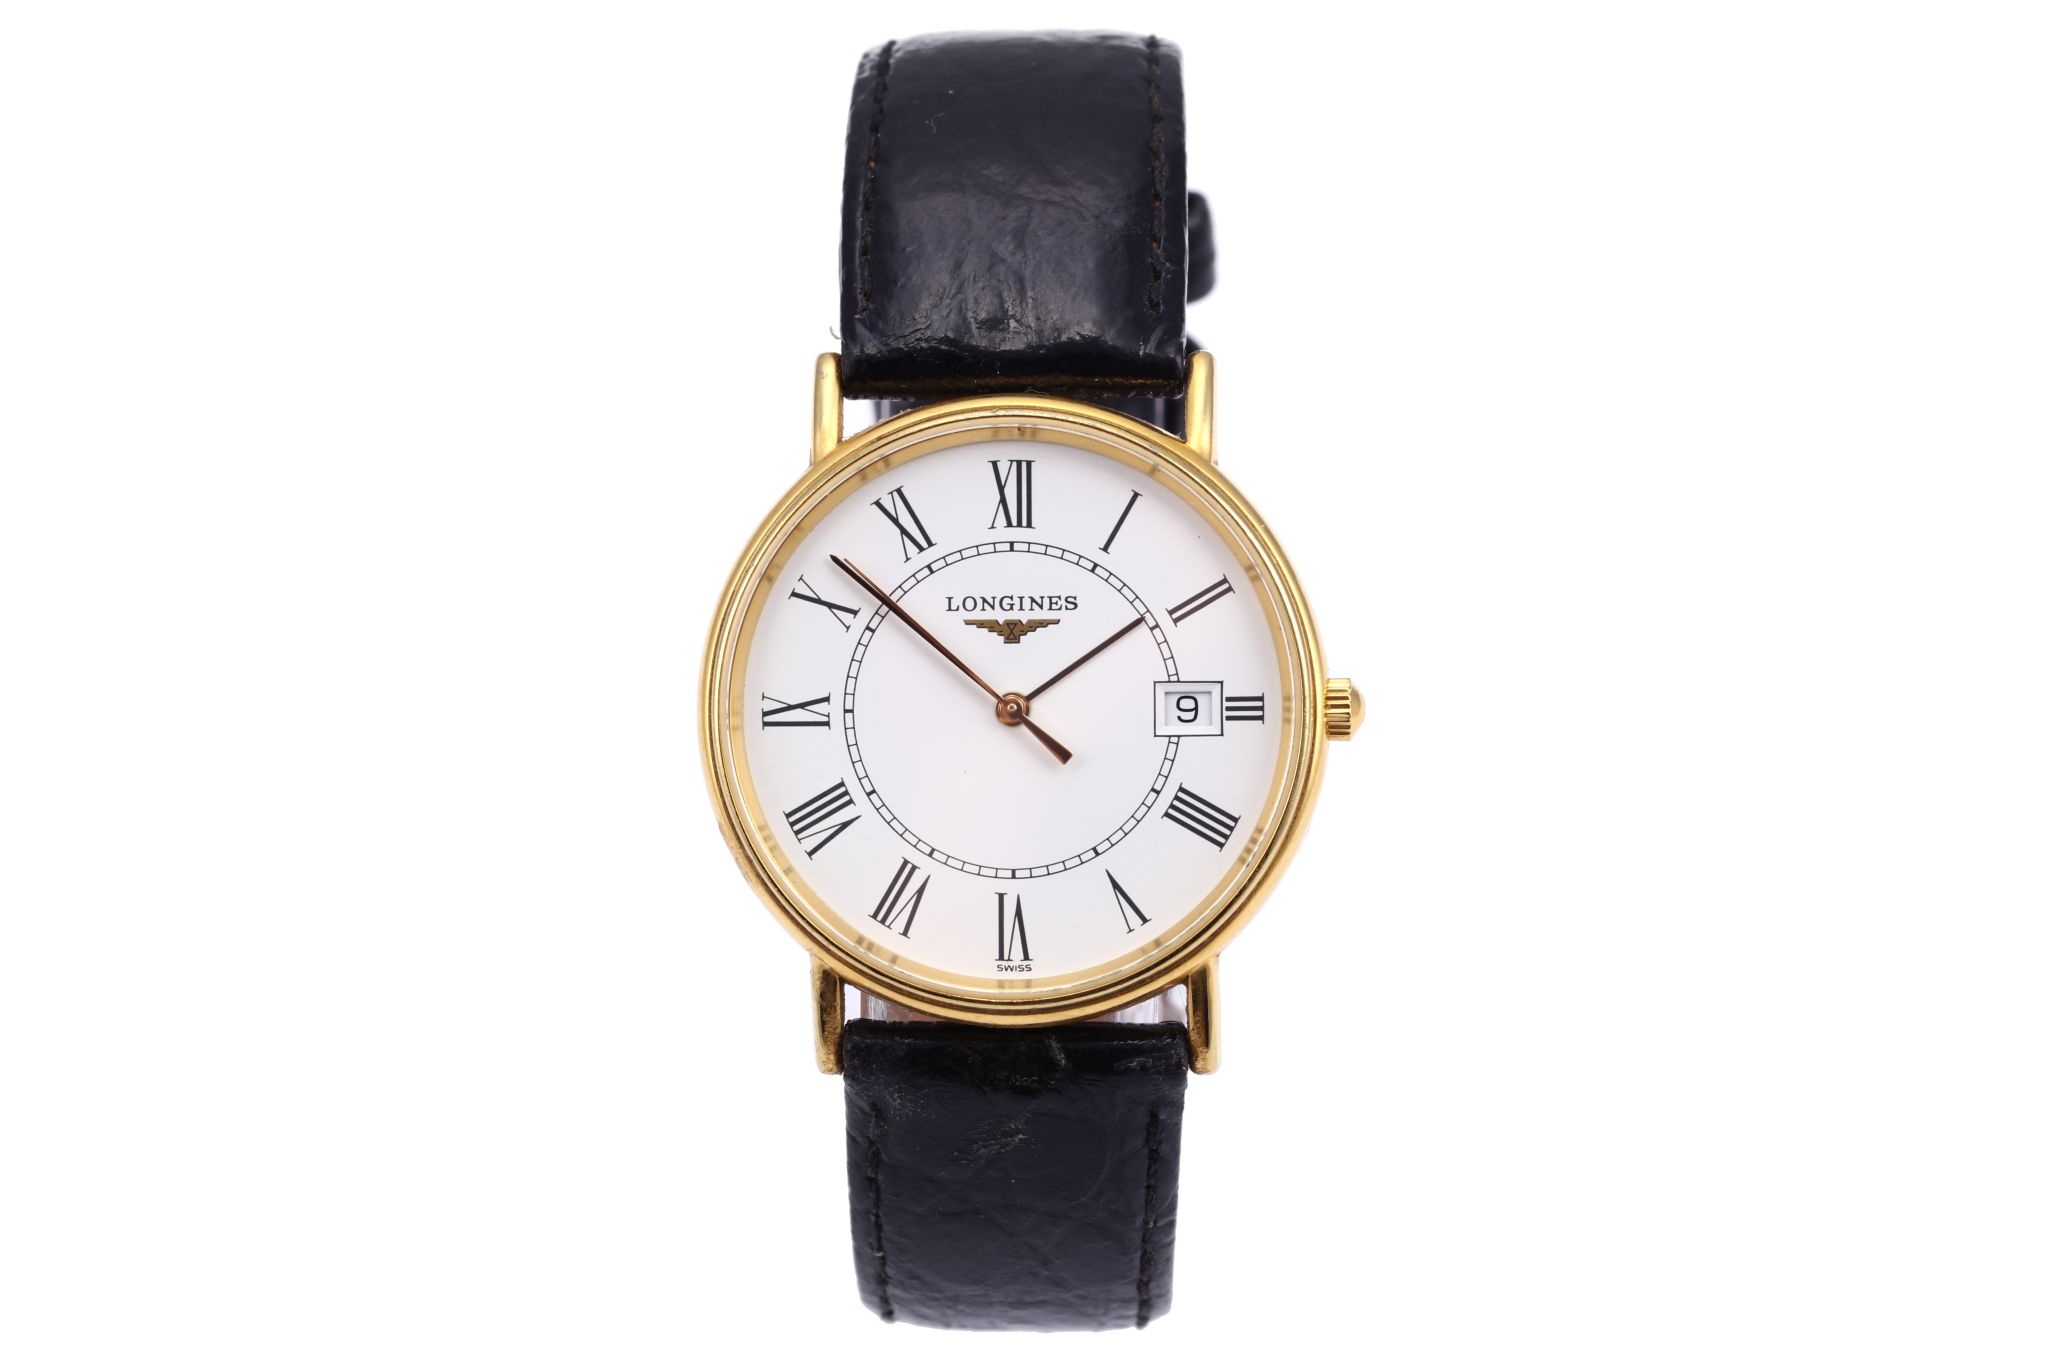 GENTS LONGINES DRESS WATCH  A gents gold plated Longines dress watch, with white dial, Roman